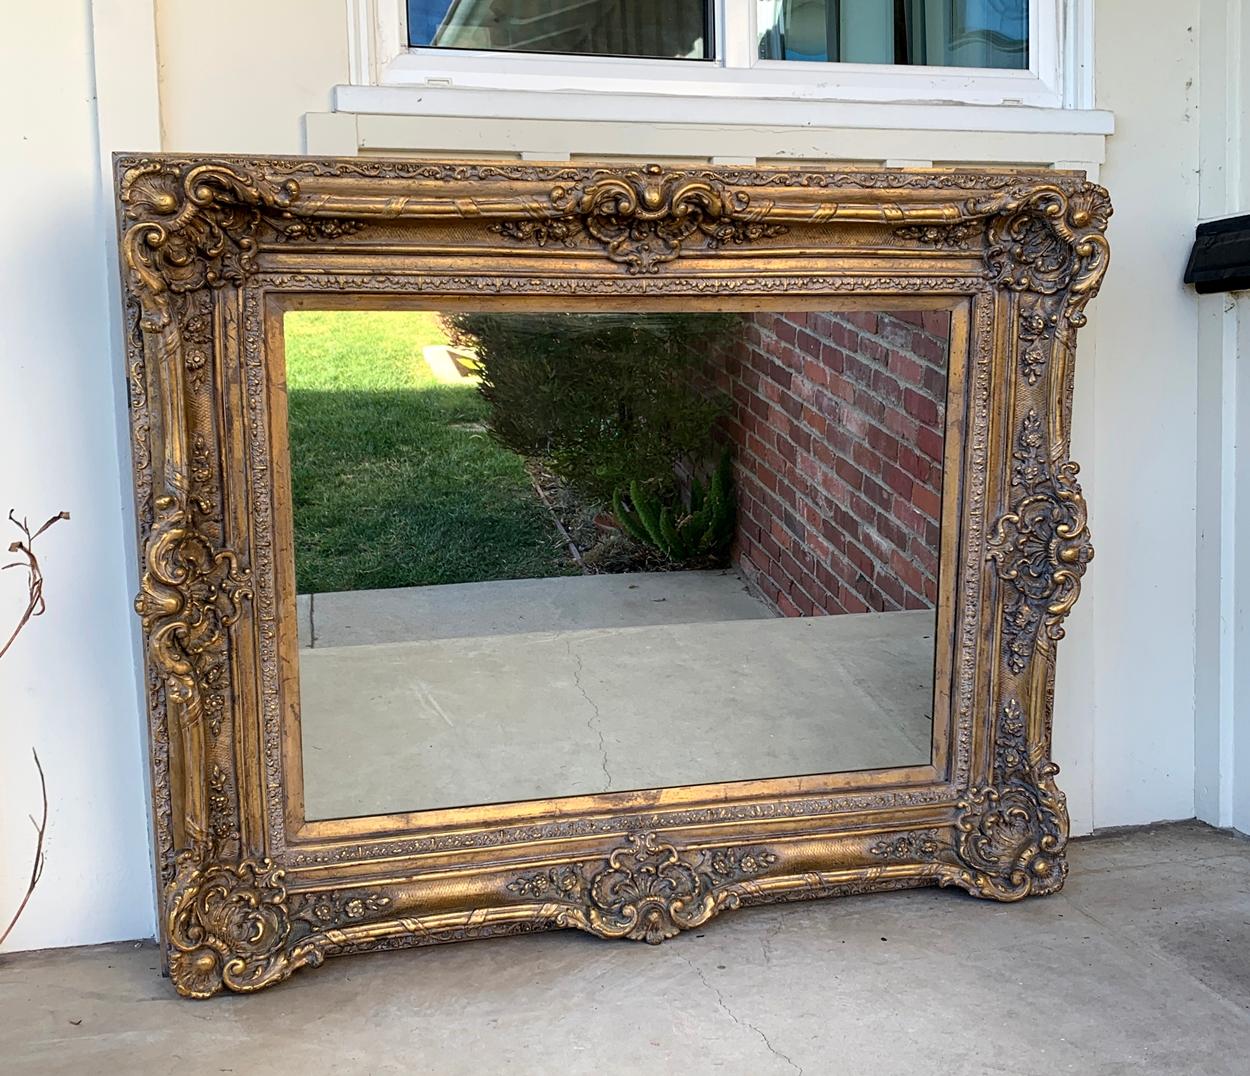 Stunningly carved mirror with gold gilded frame, in very good condition.

Measurements:
55 inches wide x 45.50 inches high x 5.50 inches deep.